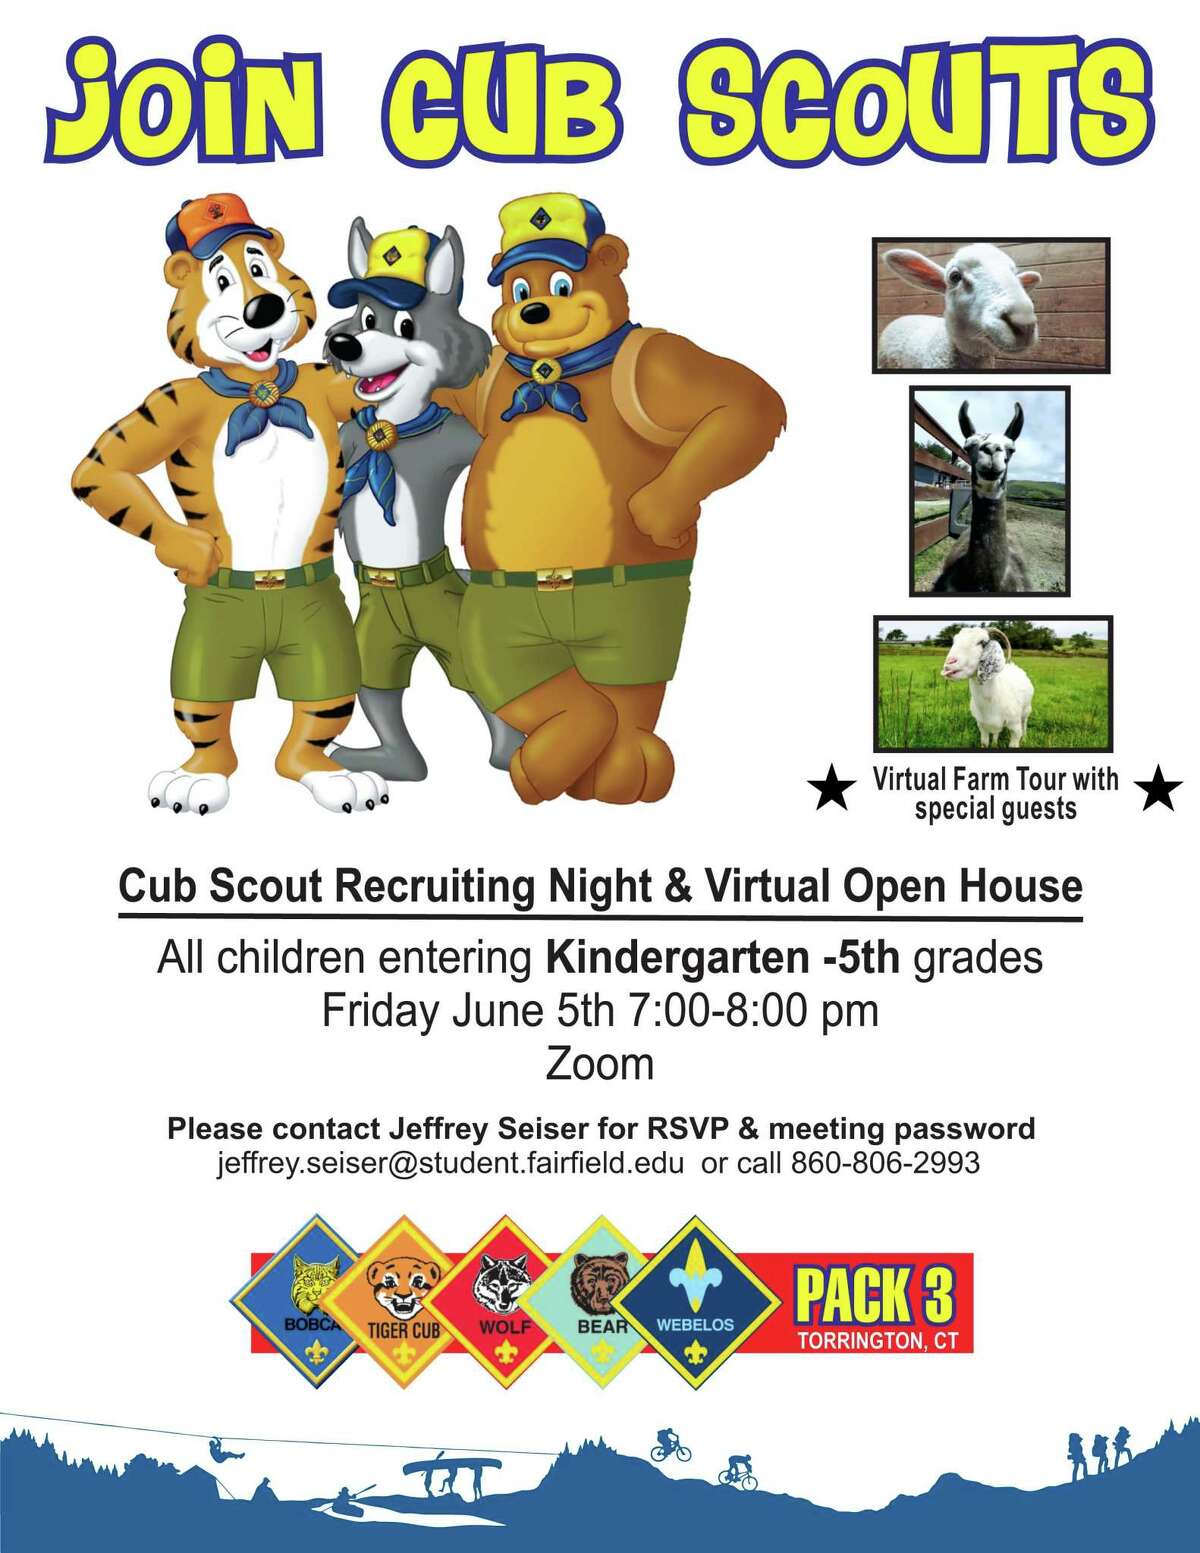 Cub Scout Pack 3 is holding a recruiting night on Zoom June 5.